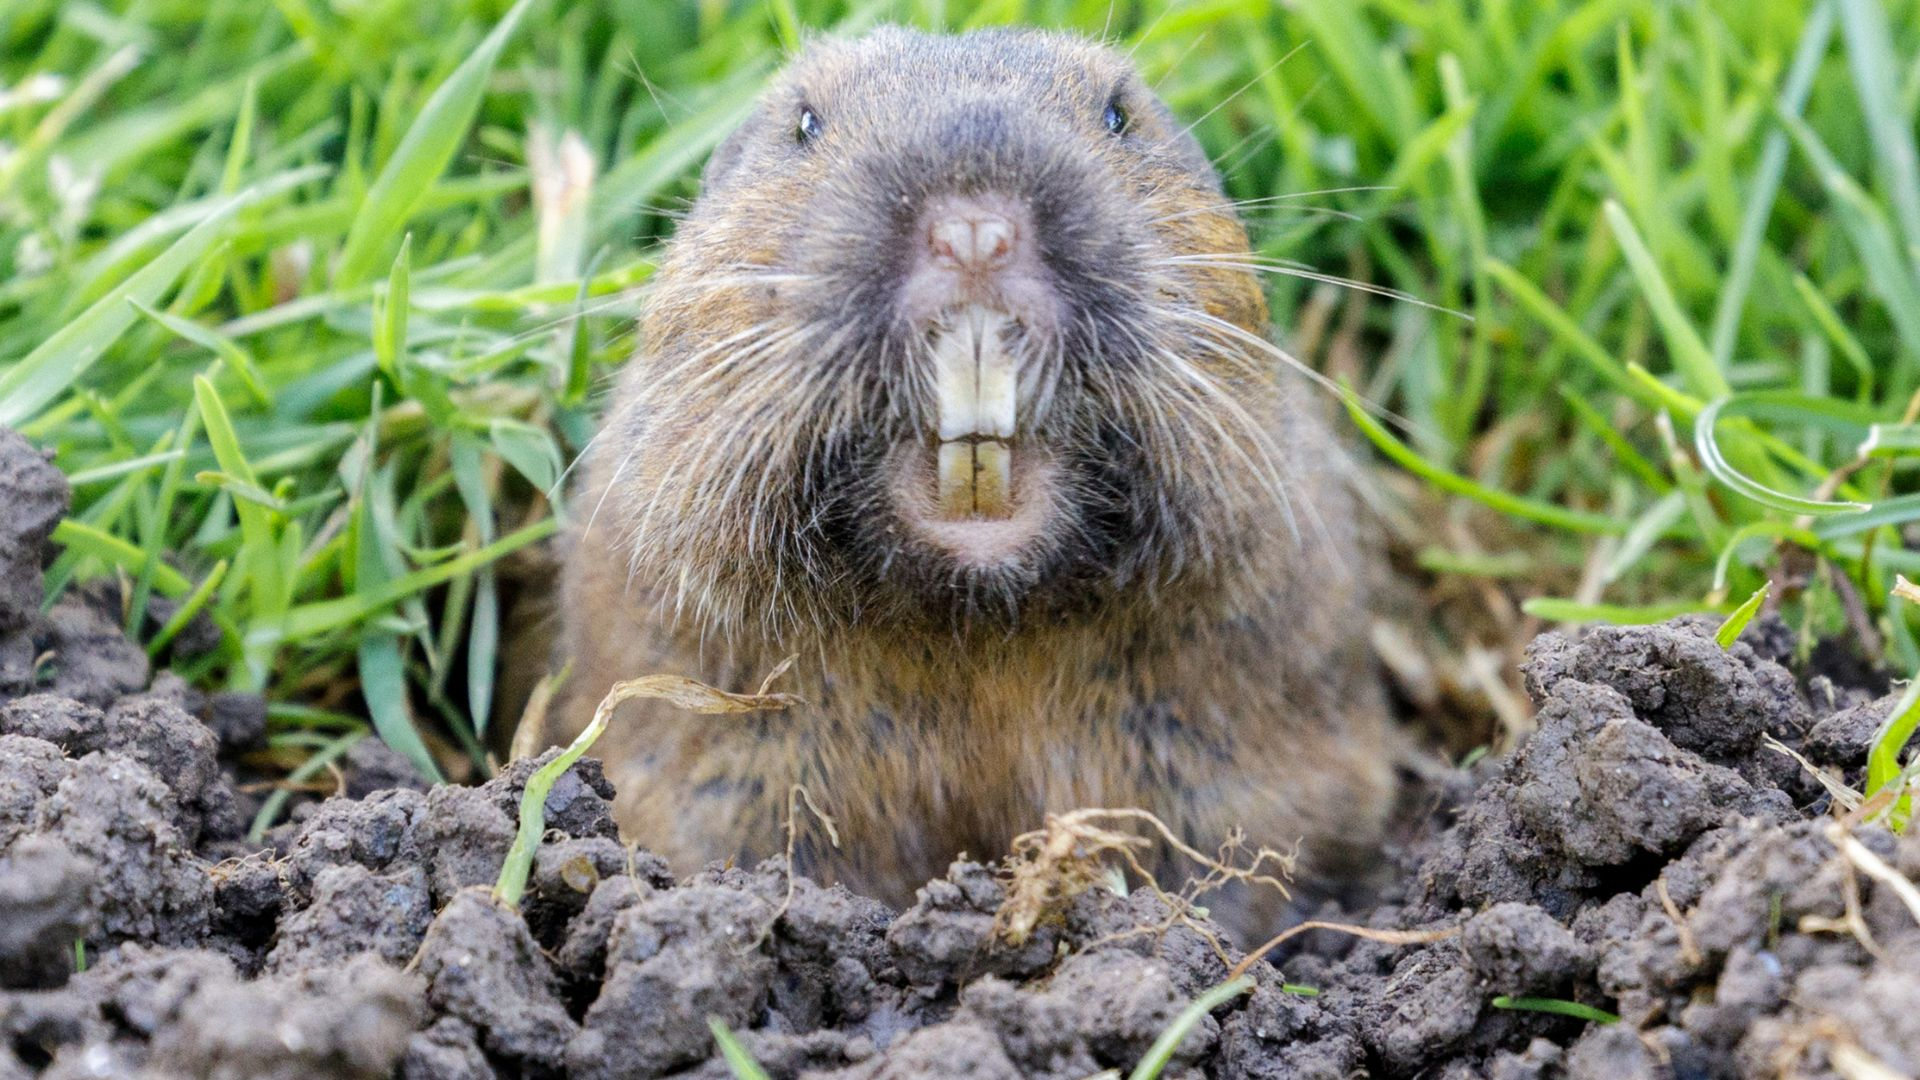 An image of a pocket gopher sticking its head out of a hole and showing its four large incisor teeth.